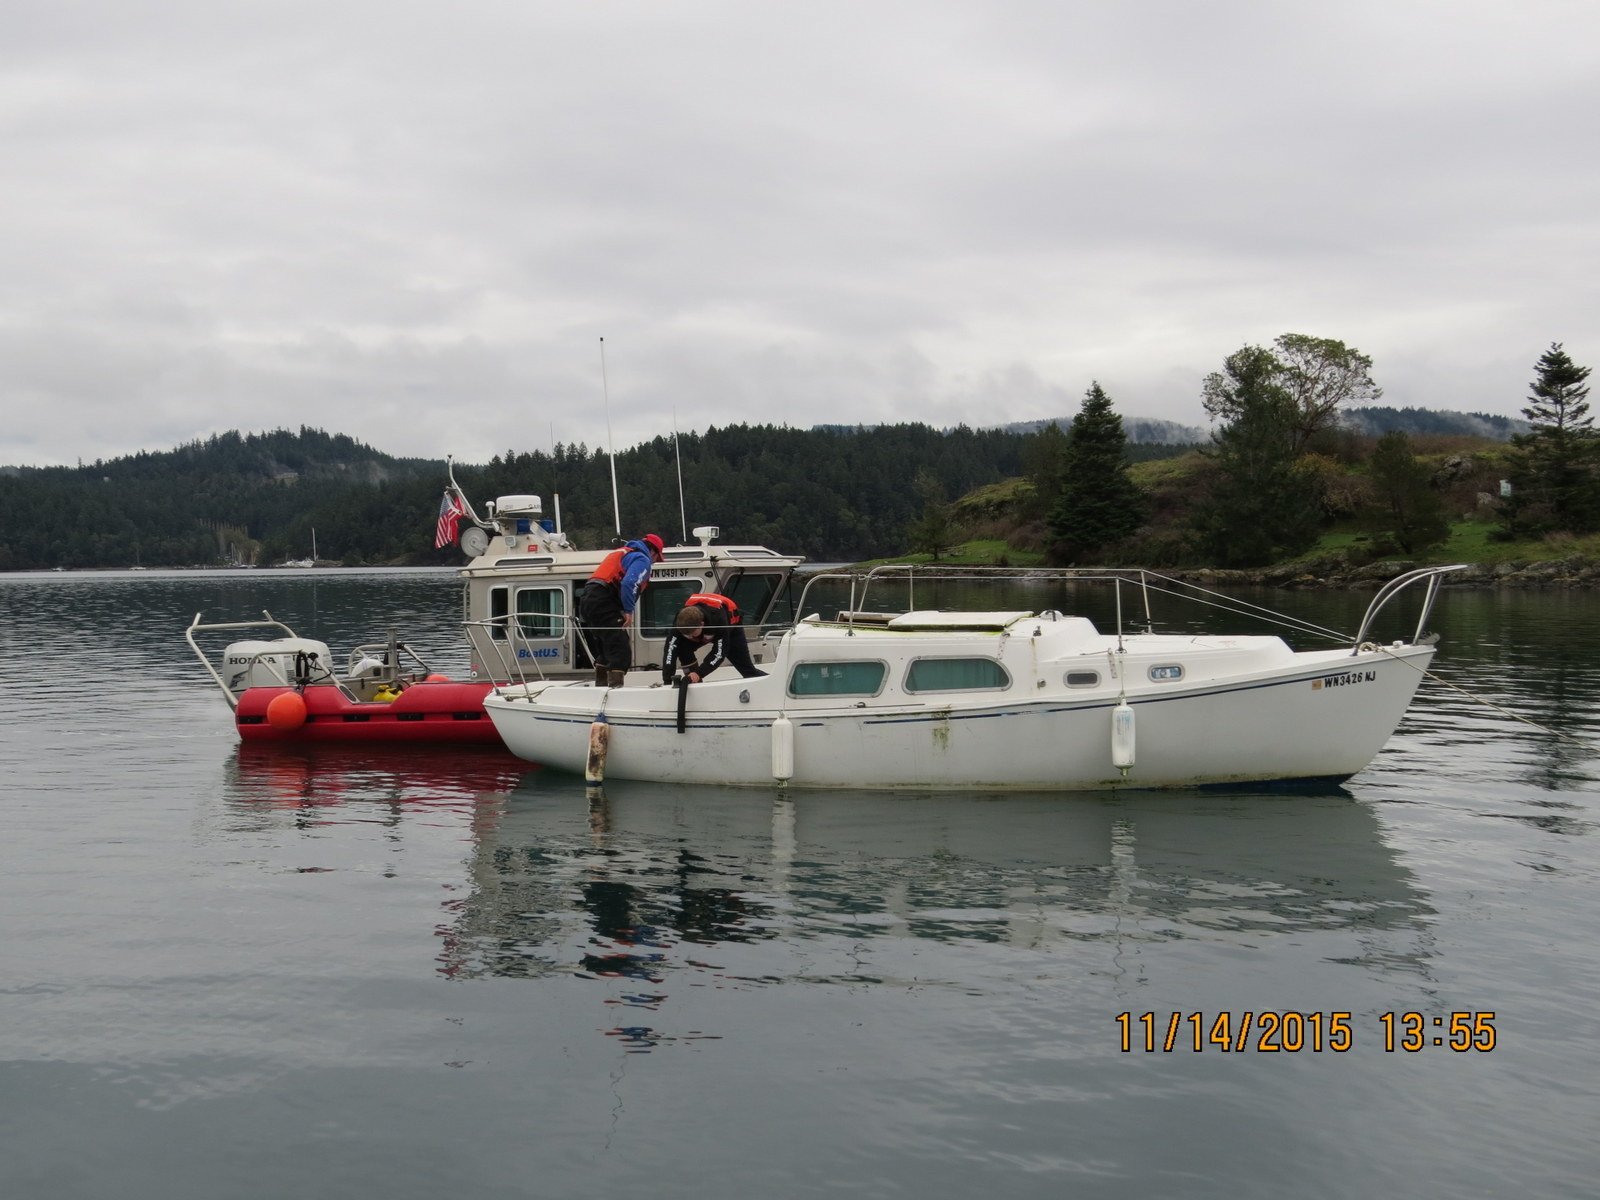 Photo Submitted by Marc FlorenzaA sailboat that Derelict Vessel Prevention Program helped owner remove from the water.